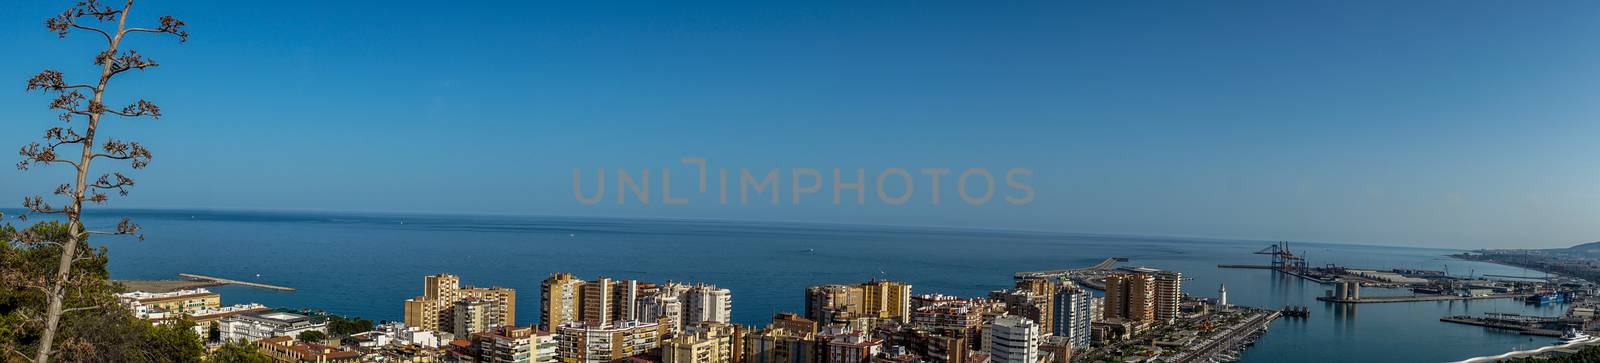 Panorama City skyline and harbour, sea port of Malaga overlooking the sea ocean in Malaga, Spain, Europe  on a summer day with blue sky